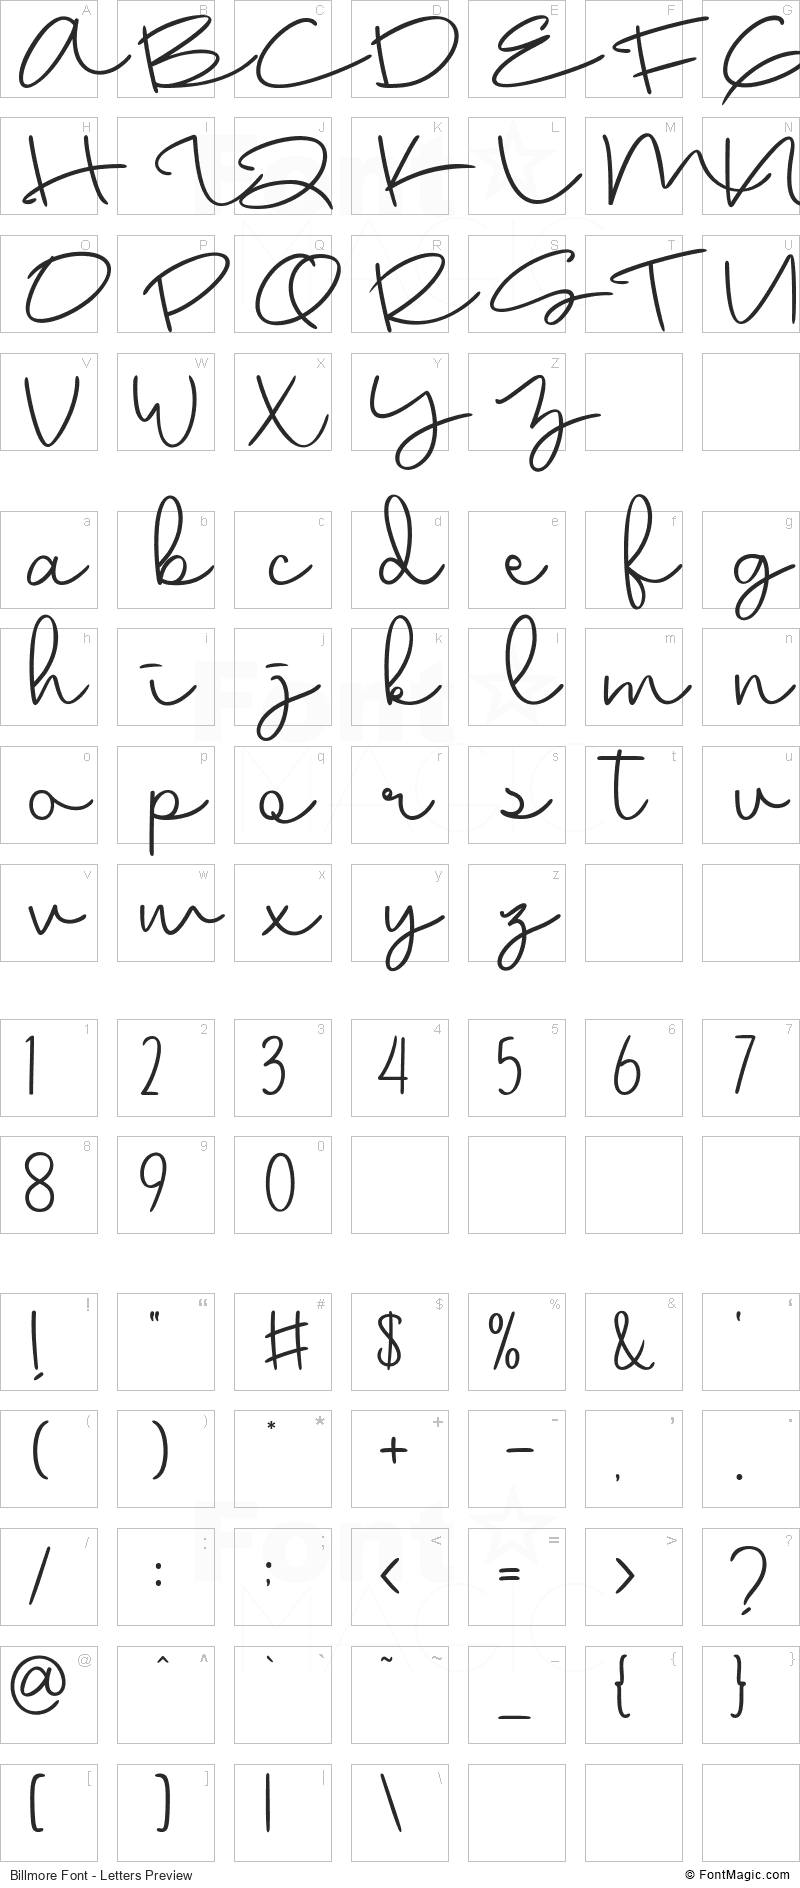 Billmore Font - All Latters Preview Chart